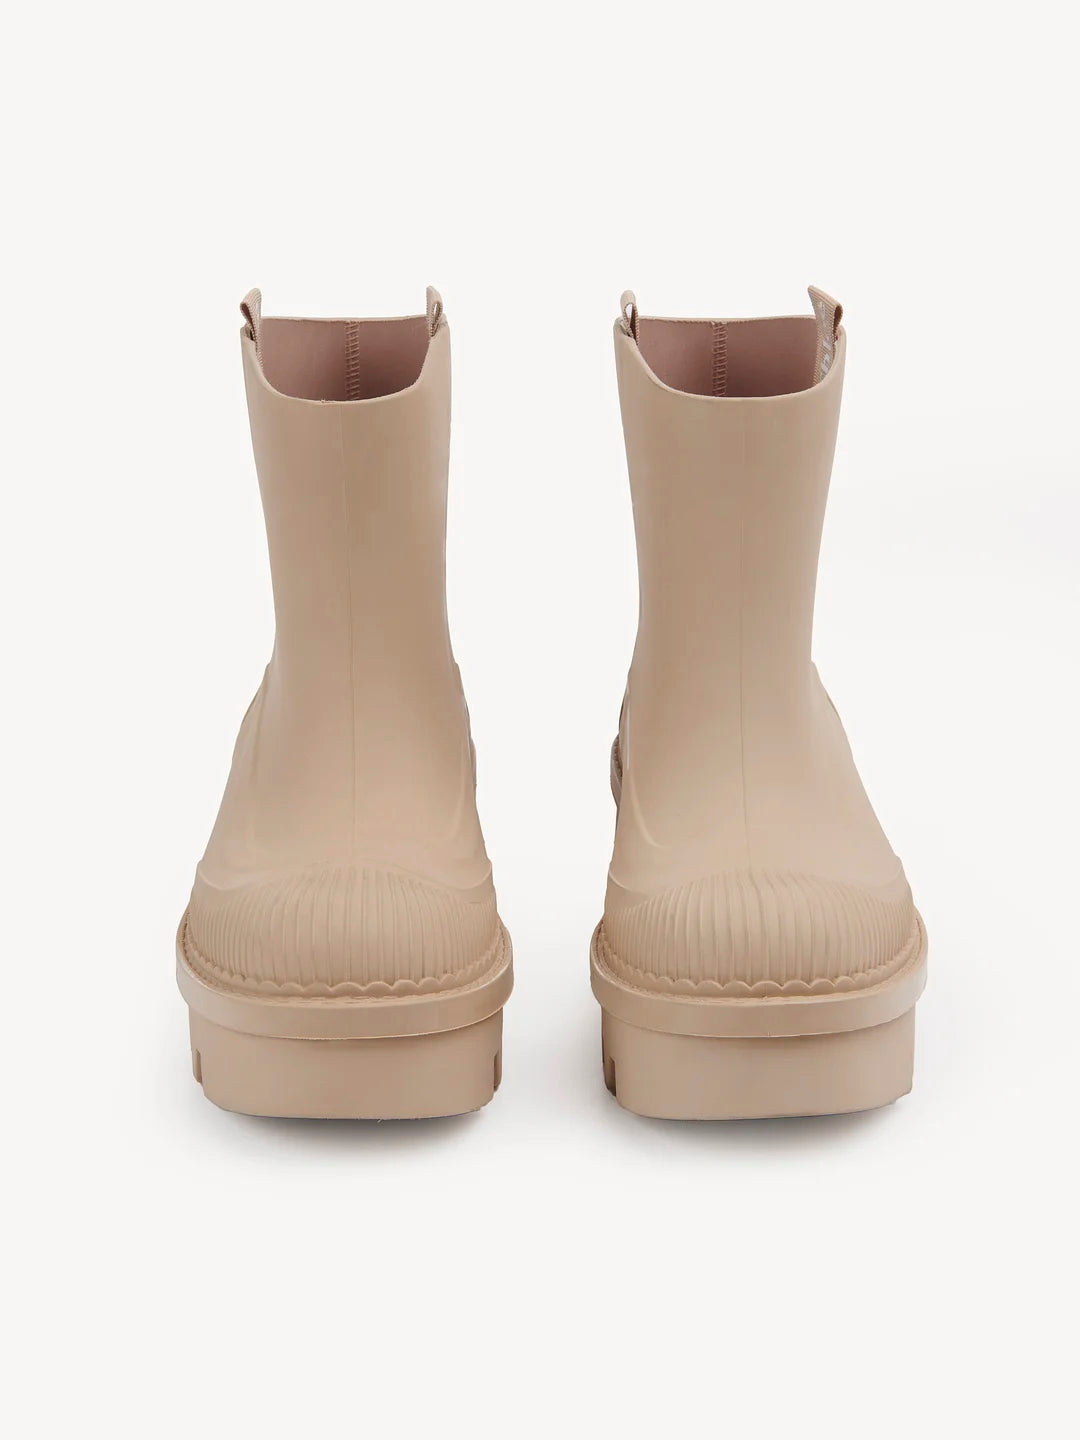 Chloe Raina Boot in Beige Rose available at The New Trend Australia.